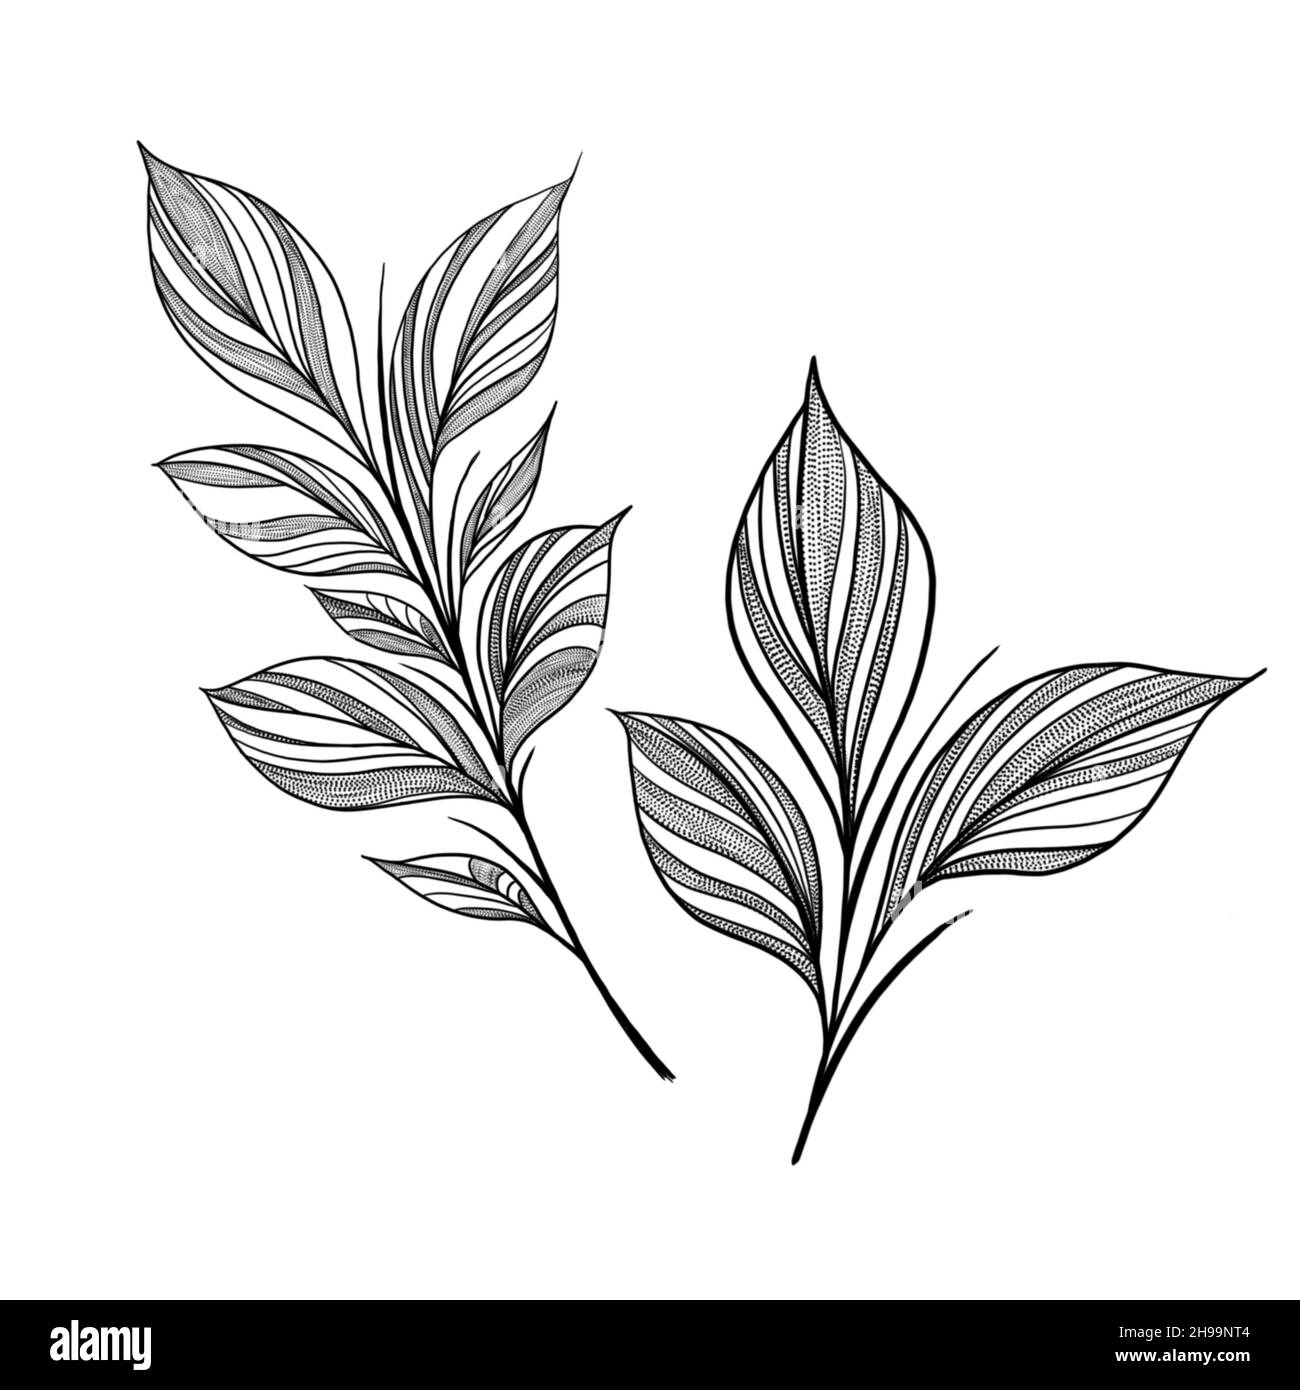 botany tattoo sketch - beautiful twig plant. Botanical element template for graphic design, wedding decor, textiles, souvenir gift, stationery print Stock Photo